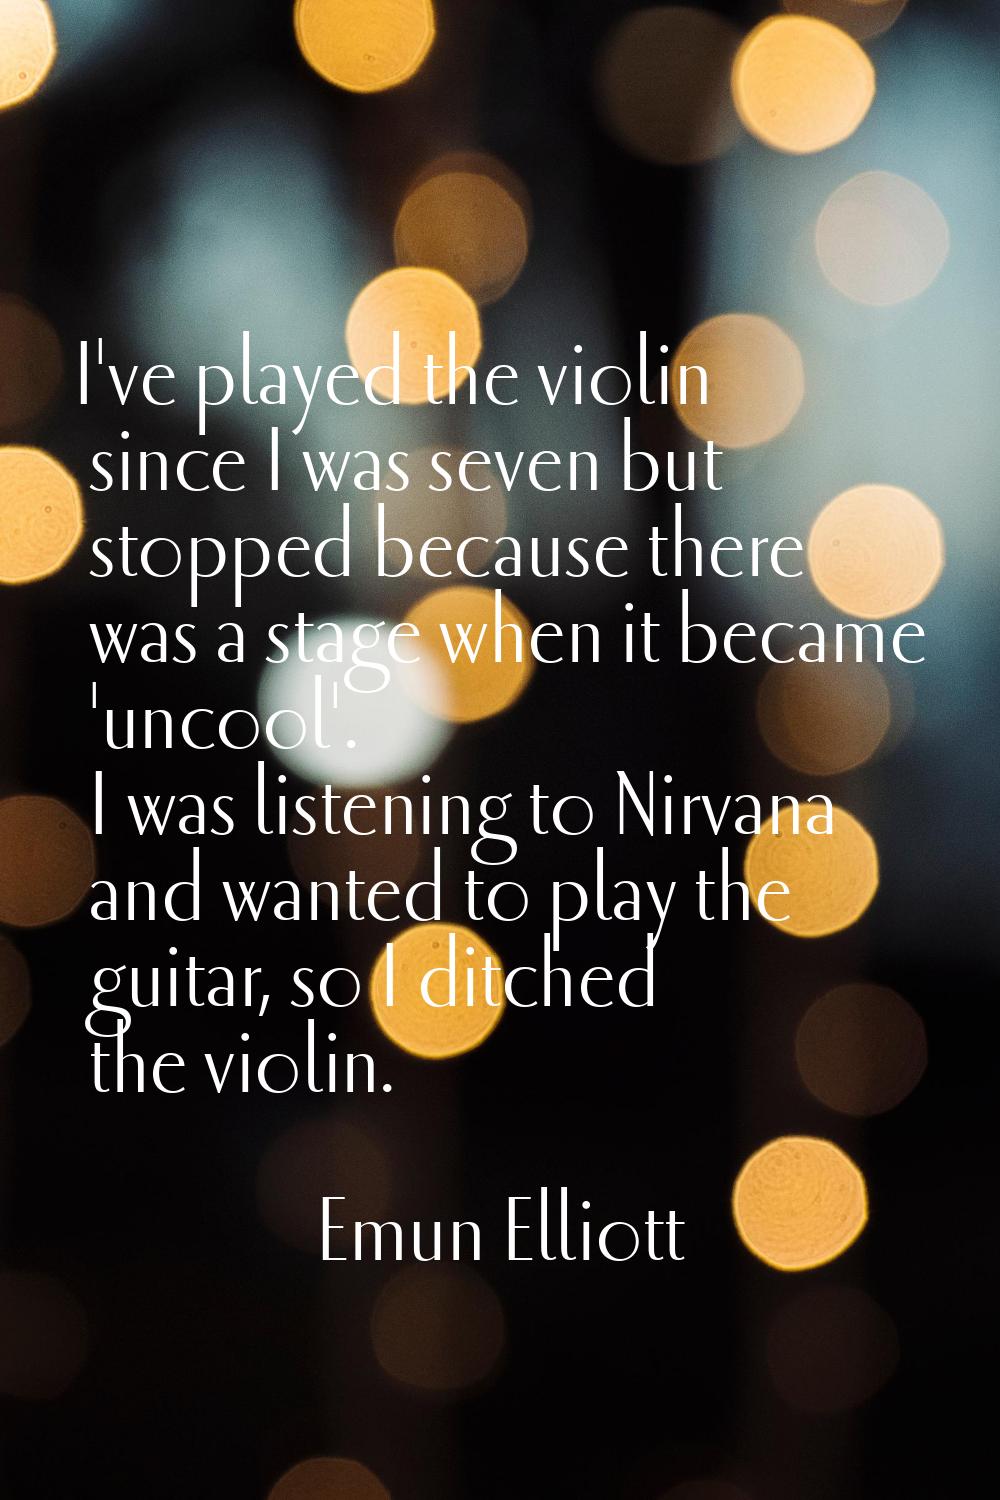 I've played the violin since I was seven but stopped because there was a stage when it became 'unco